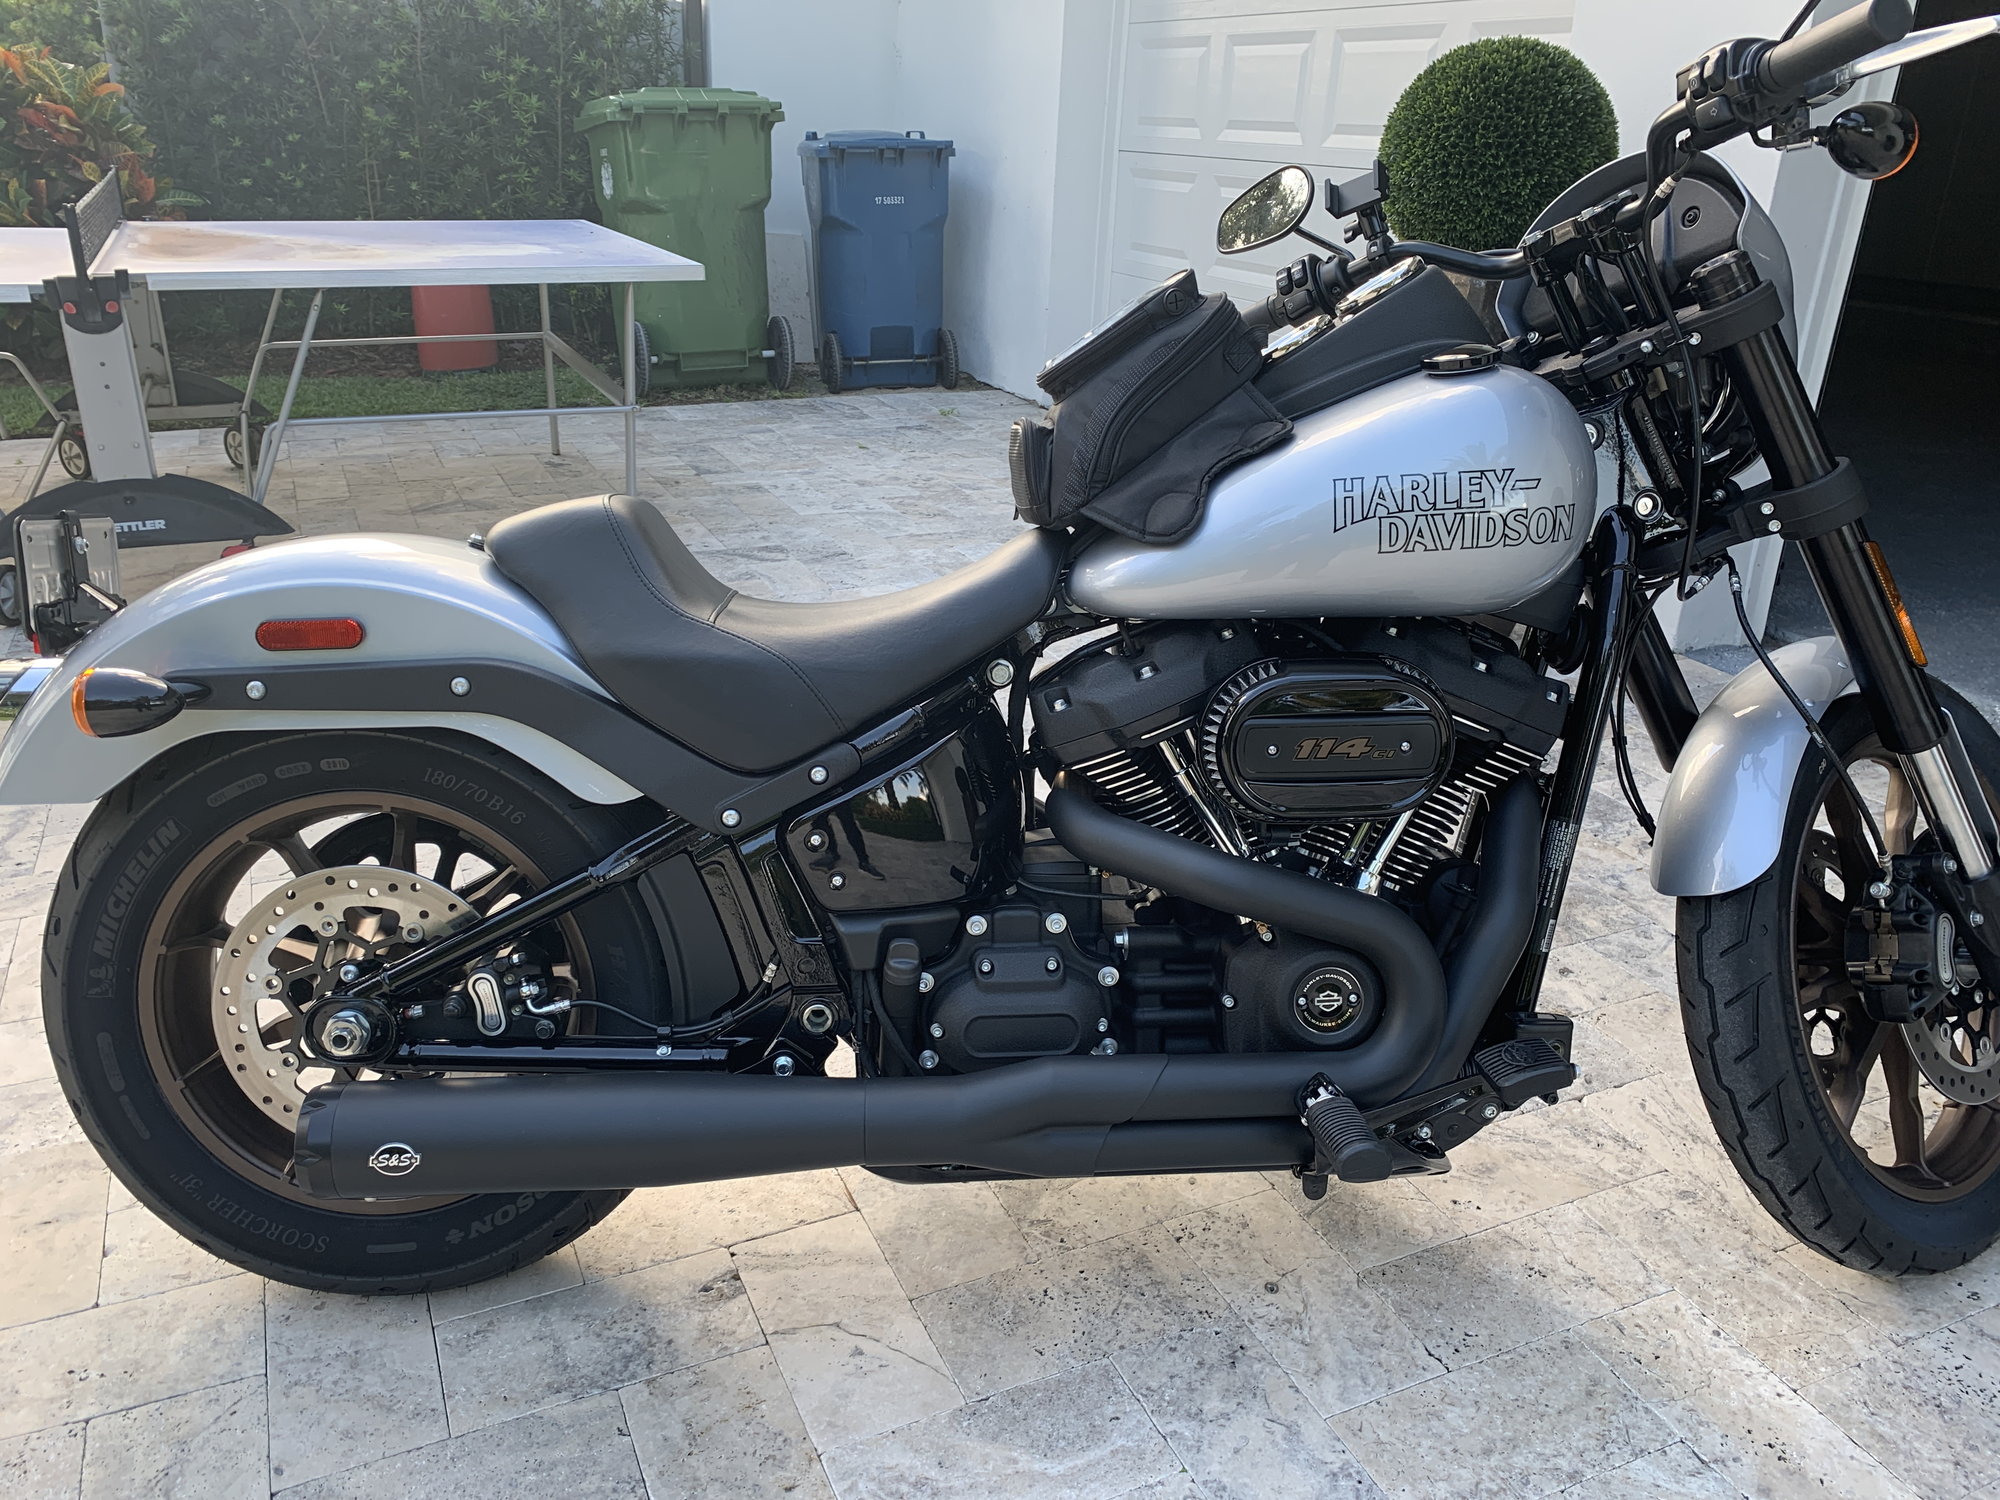 2020 Lowrider S Exhaust Pipe Recommendation Page 2 Harley Davidson Forums